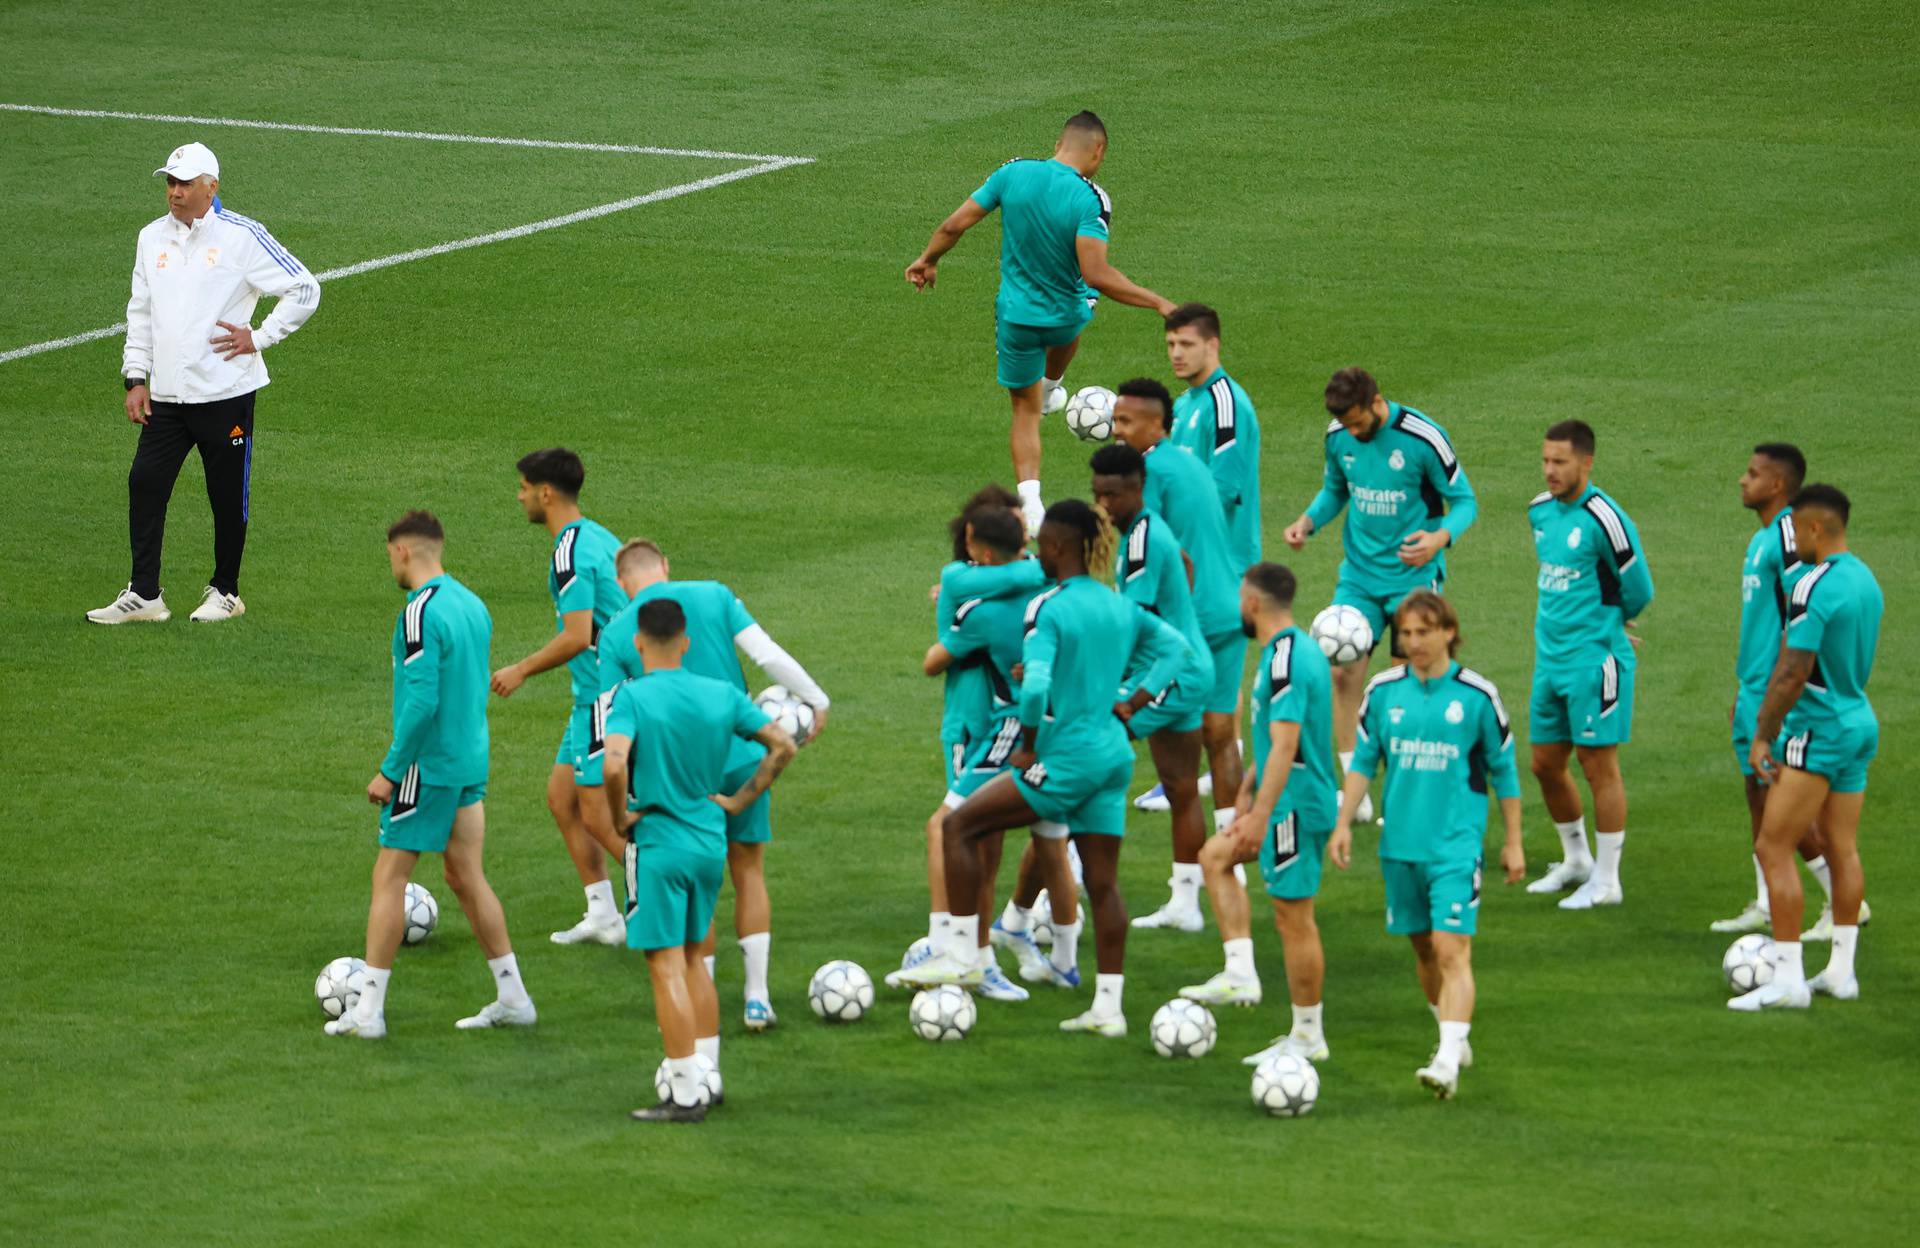 Champions League - Champions League Final - Real Madrid Training